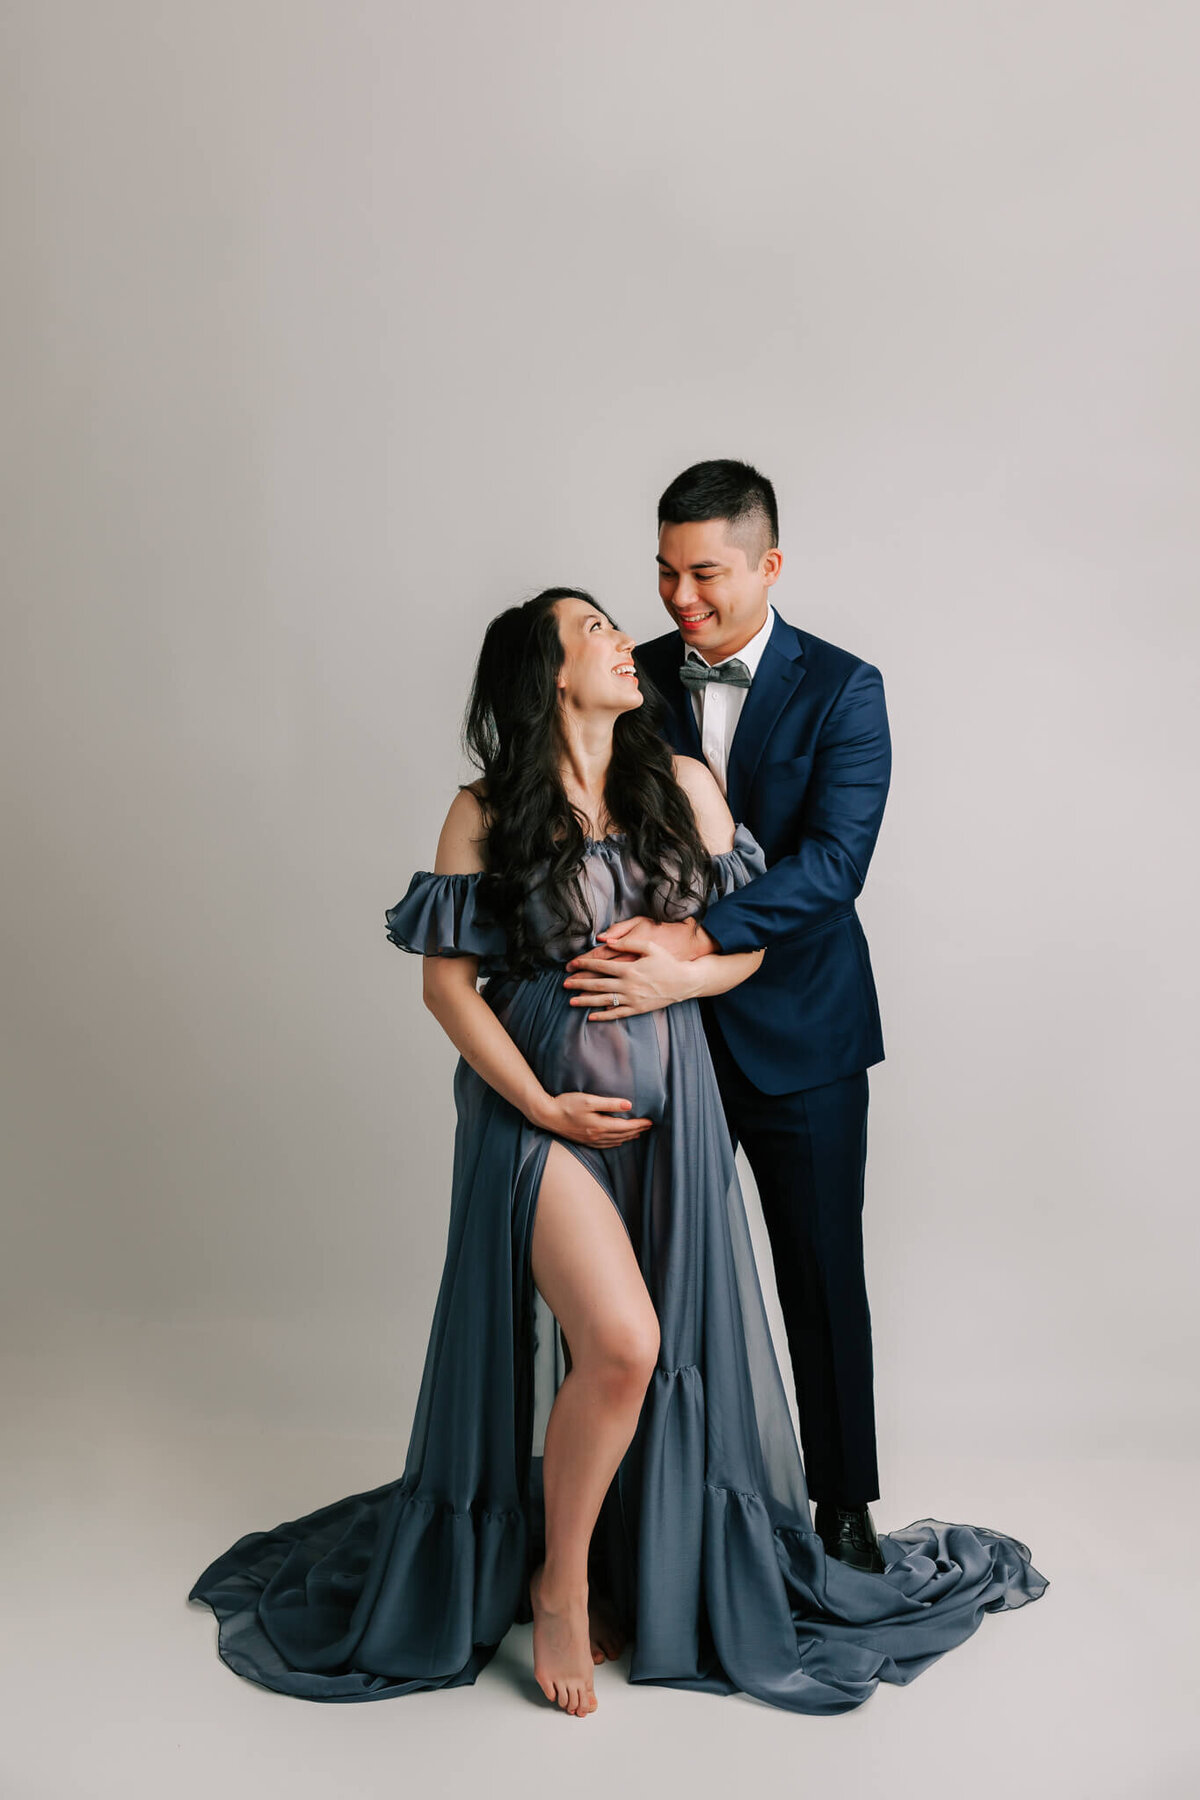 maternity portrait of a couple wearing blue suit and blue dress. She is smiling at him.